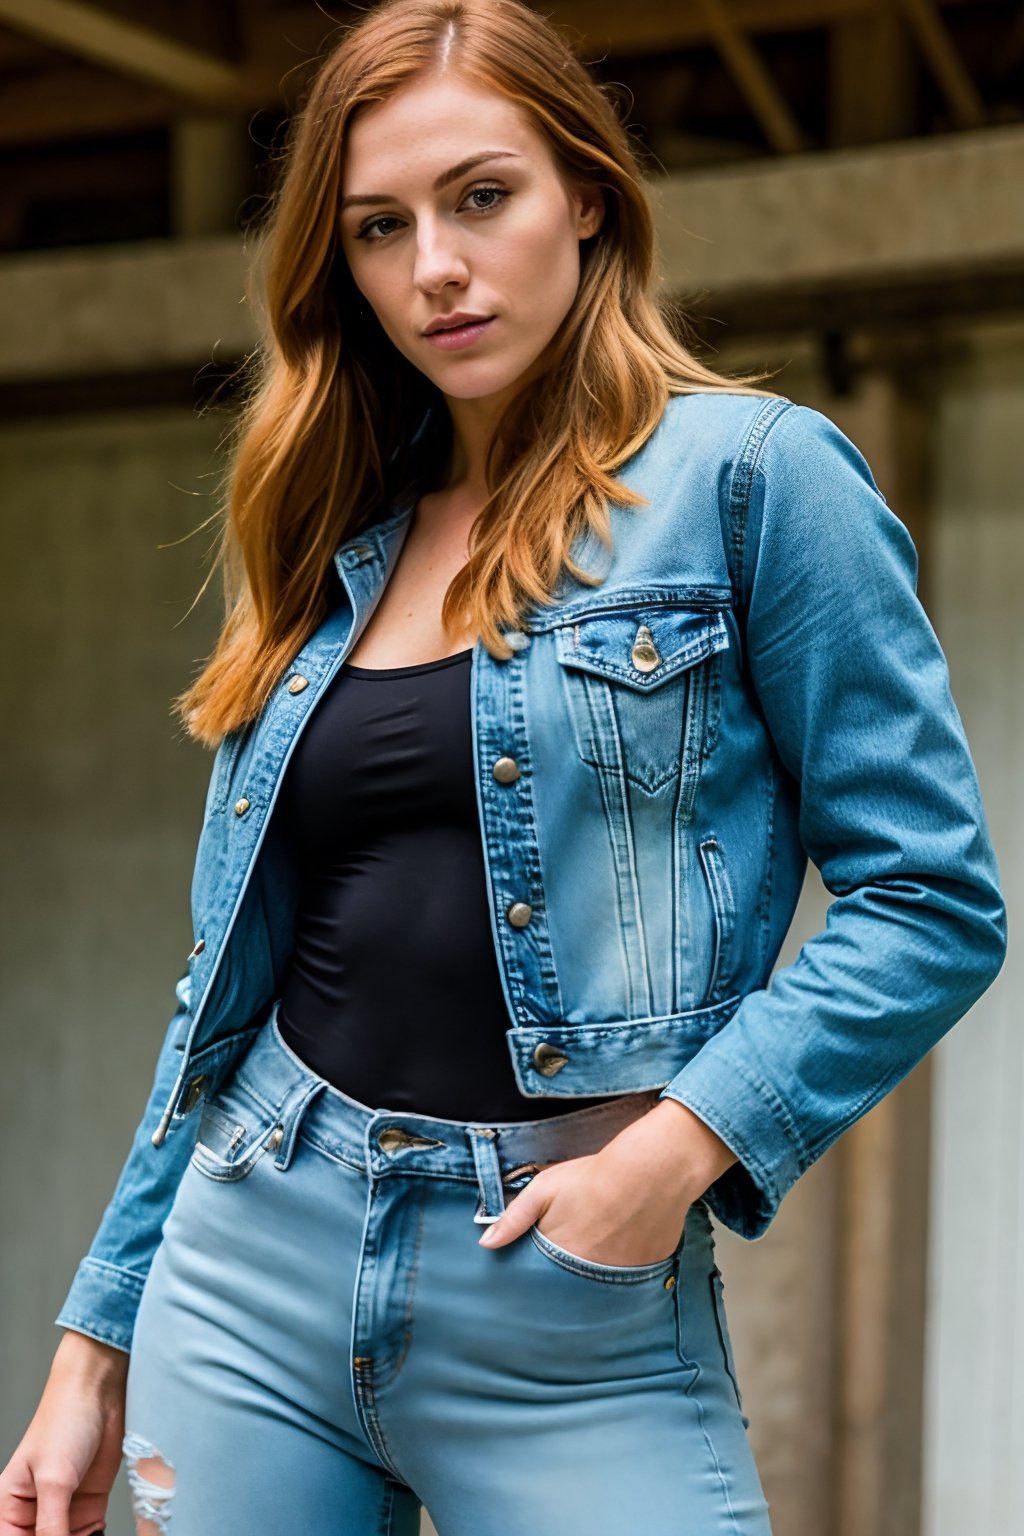 beautiful detailed eyes, tight jeans, tight cropped denim jacket, becky lynch make-up, posing very sexy and flirting during a model photoshoot, realistic, beckylynch